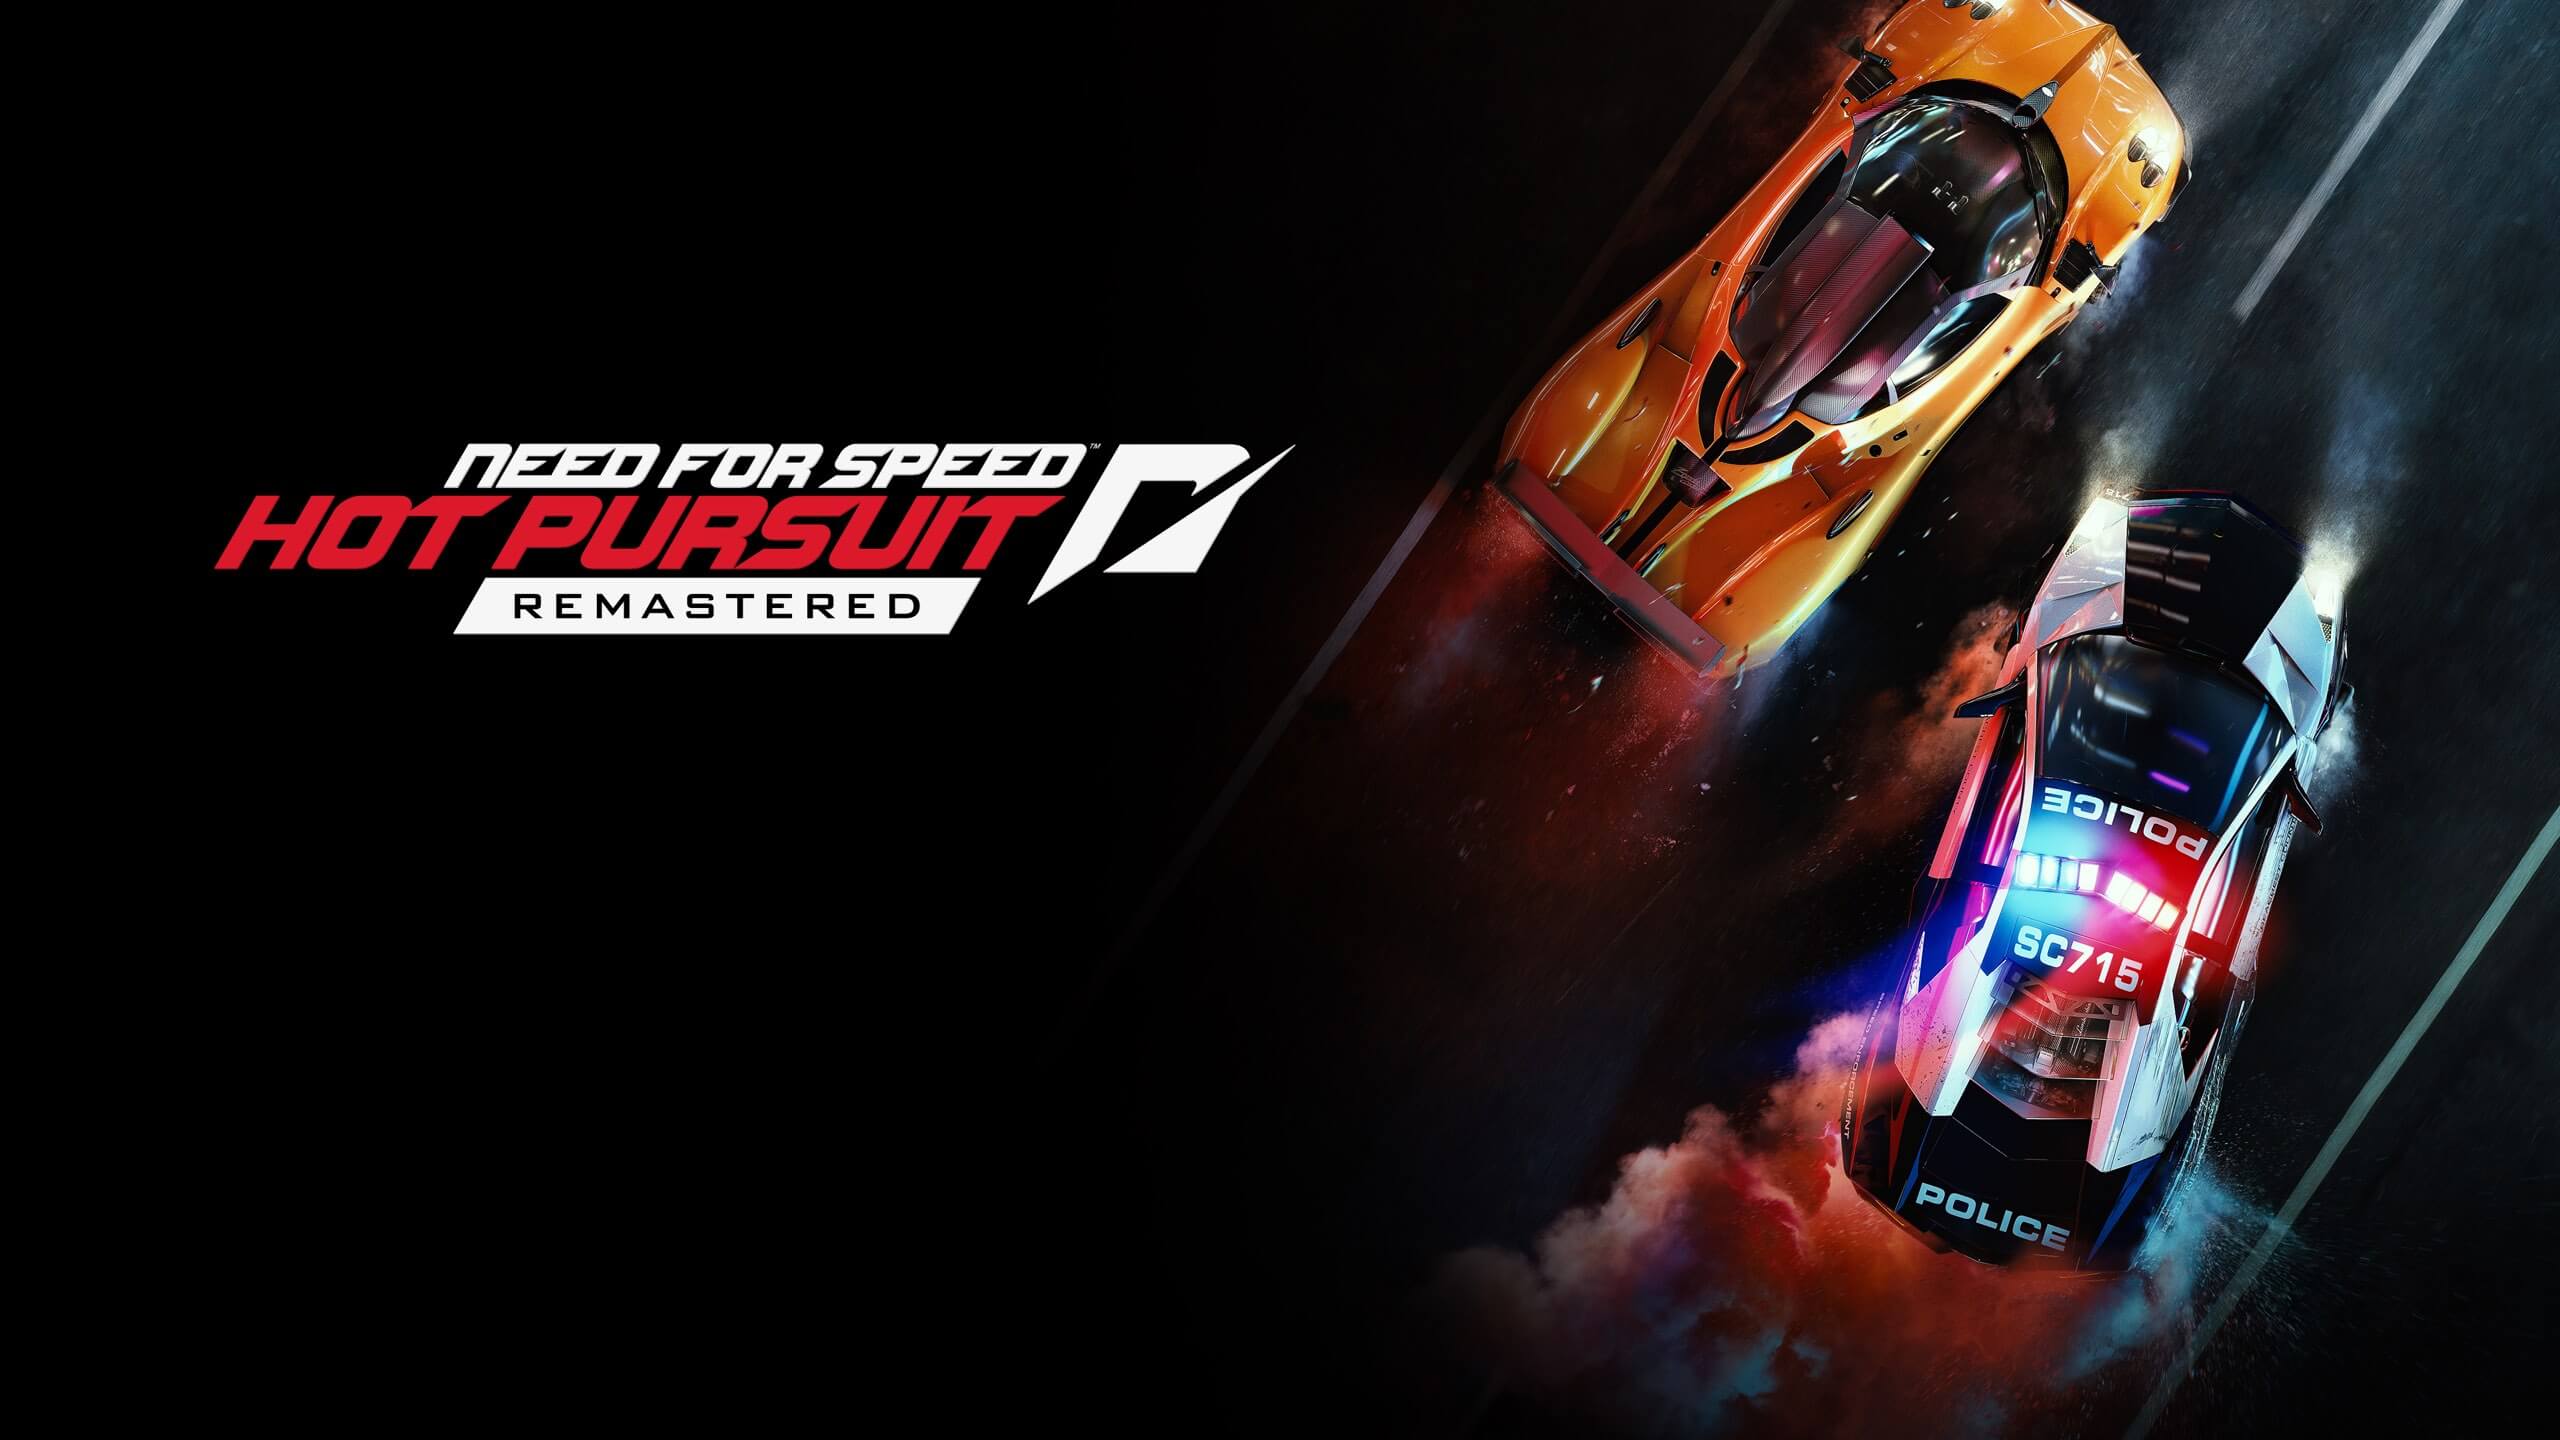 NFS - Need for Speed Hot Pursuit Remastered - promocja